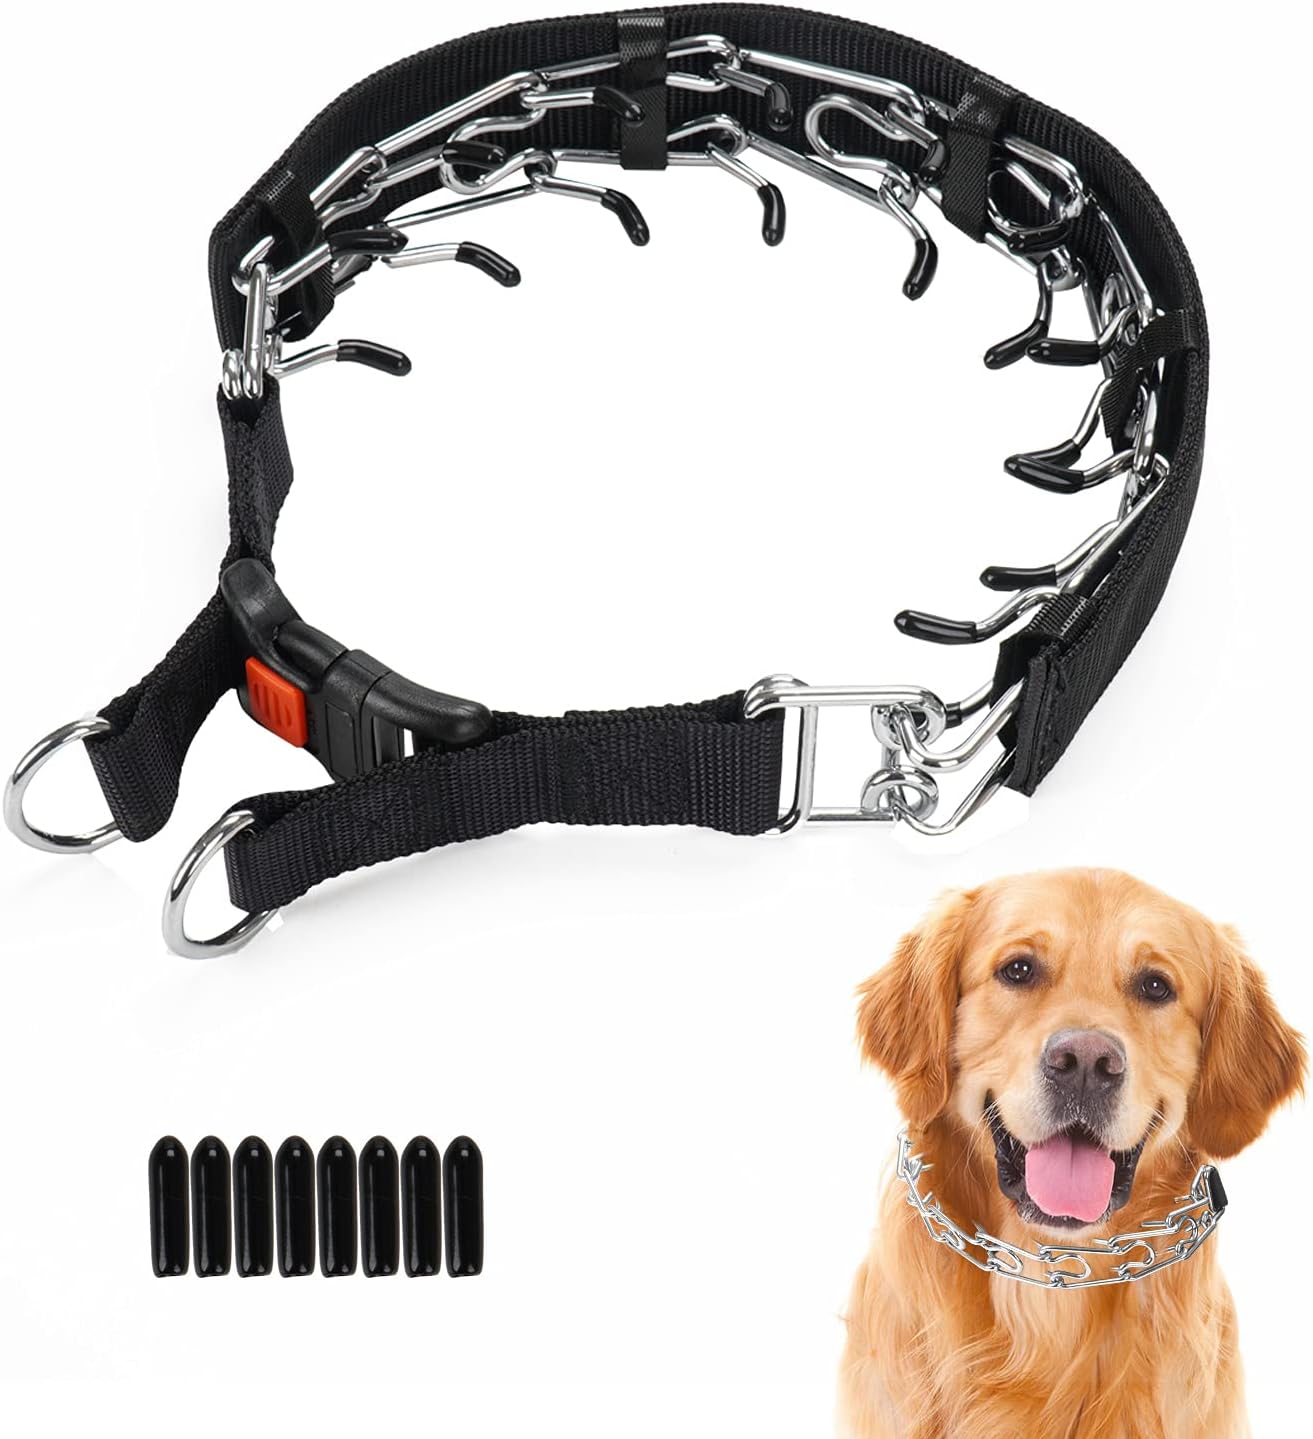 Dog Prong Training Collar, Dog Choke Pinch Collar with Comfort Tips and Quick Release Snap Buckle for Small Medium Large Dogs (Packed with 8 Extra Tips)